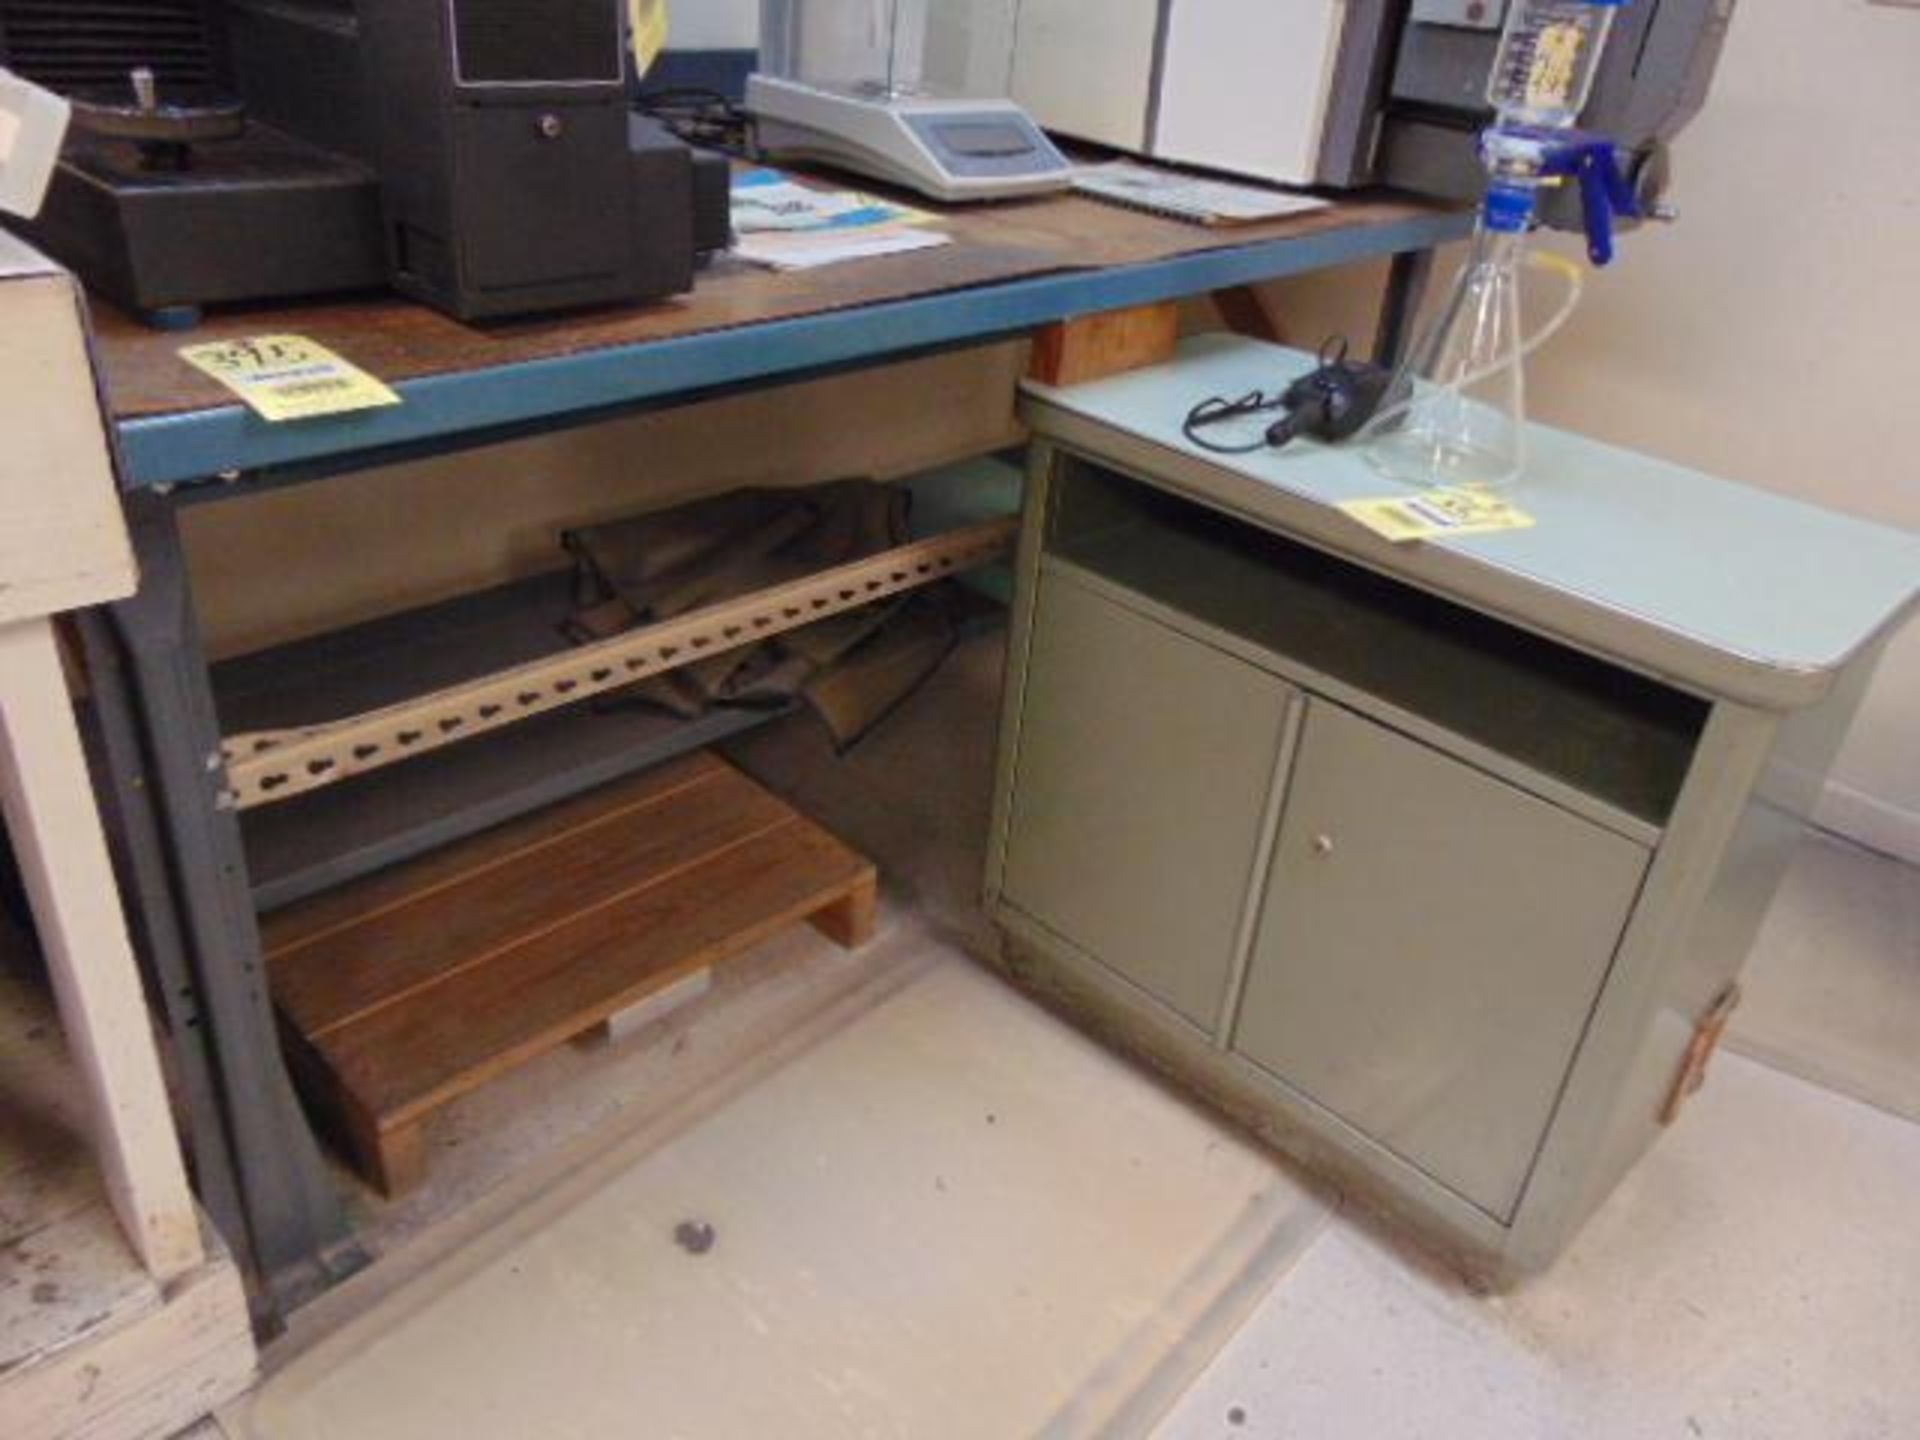 LOT OF STEEL WORK BENCH & WOOD TABLE (Note: cannot be removed until empty) - Image 2 of 2